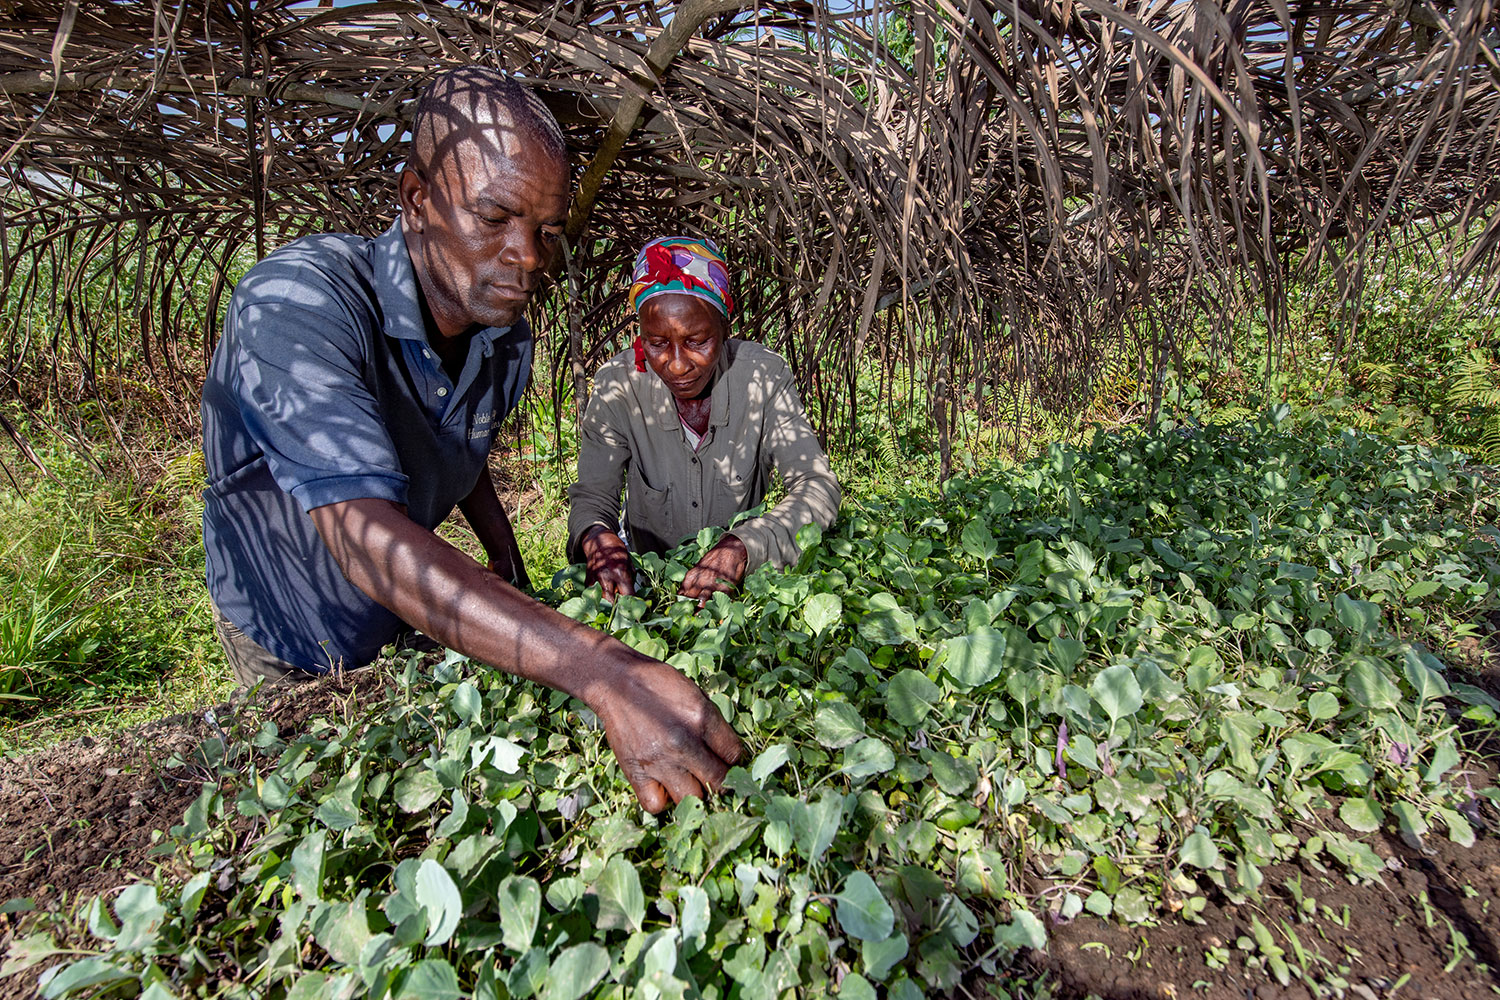 Lucy and a lead farmer in her cooperative tend to raised beds of seedlings